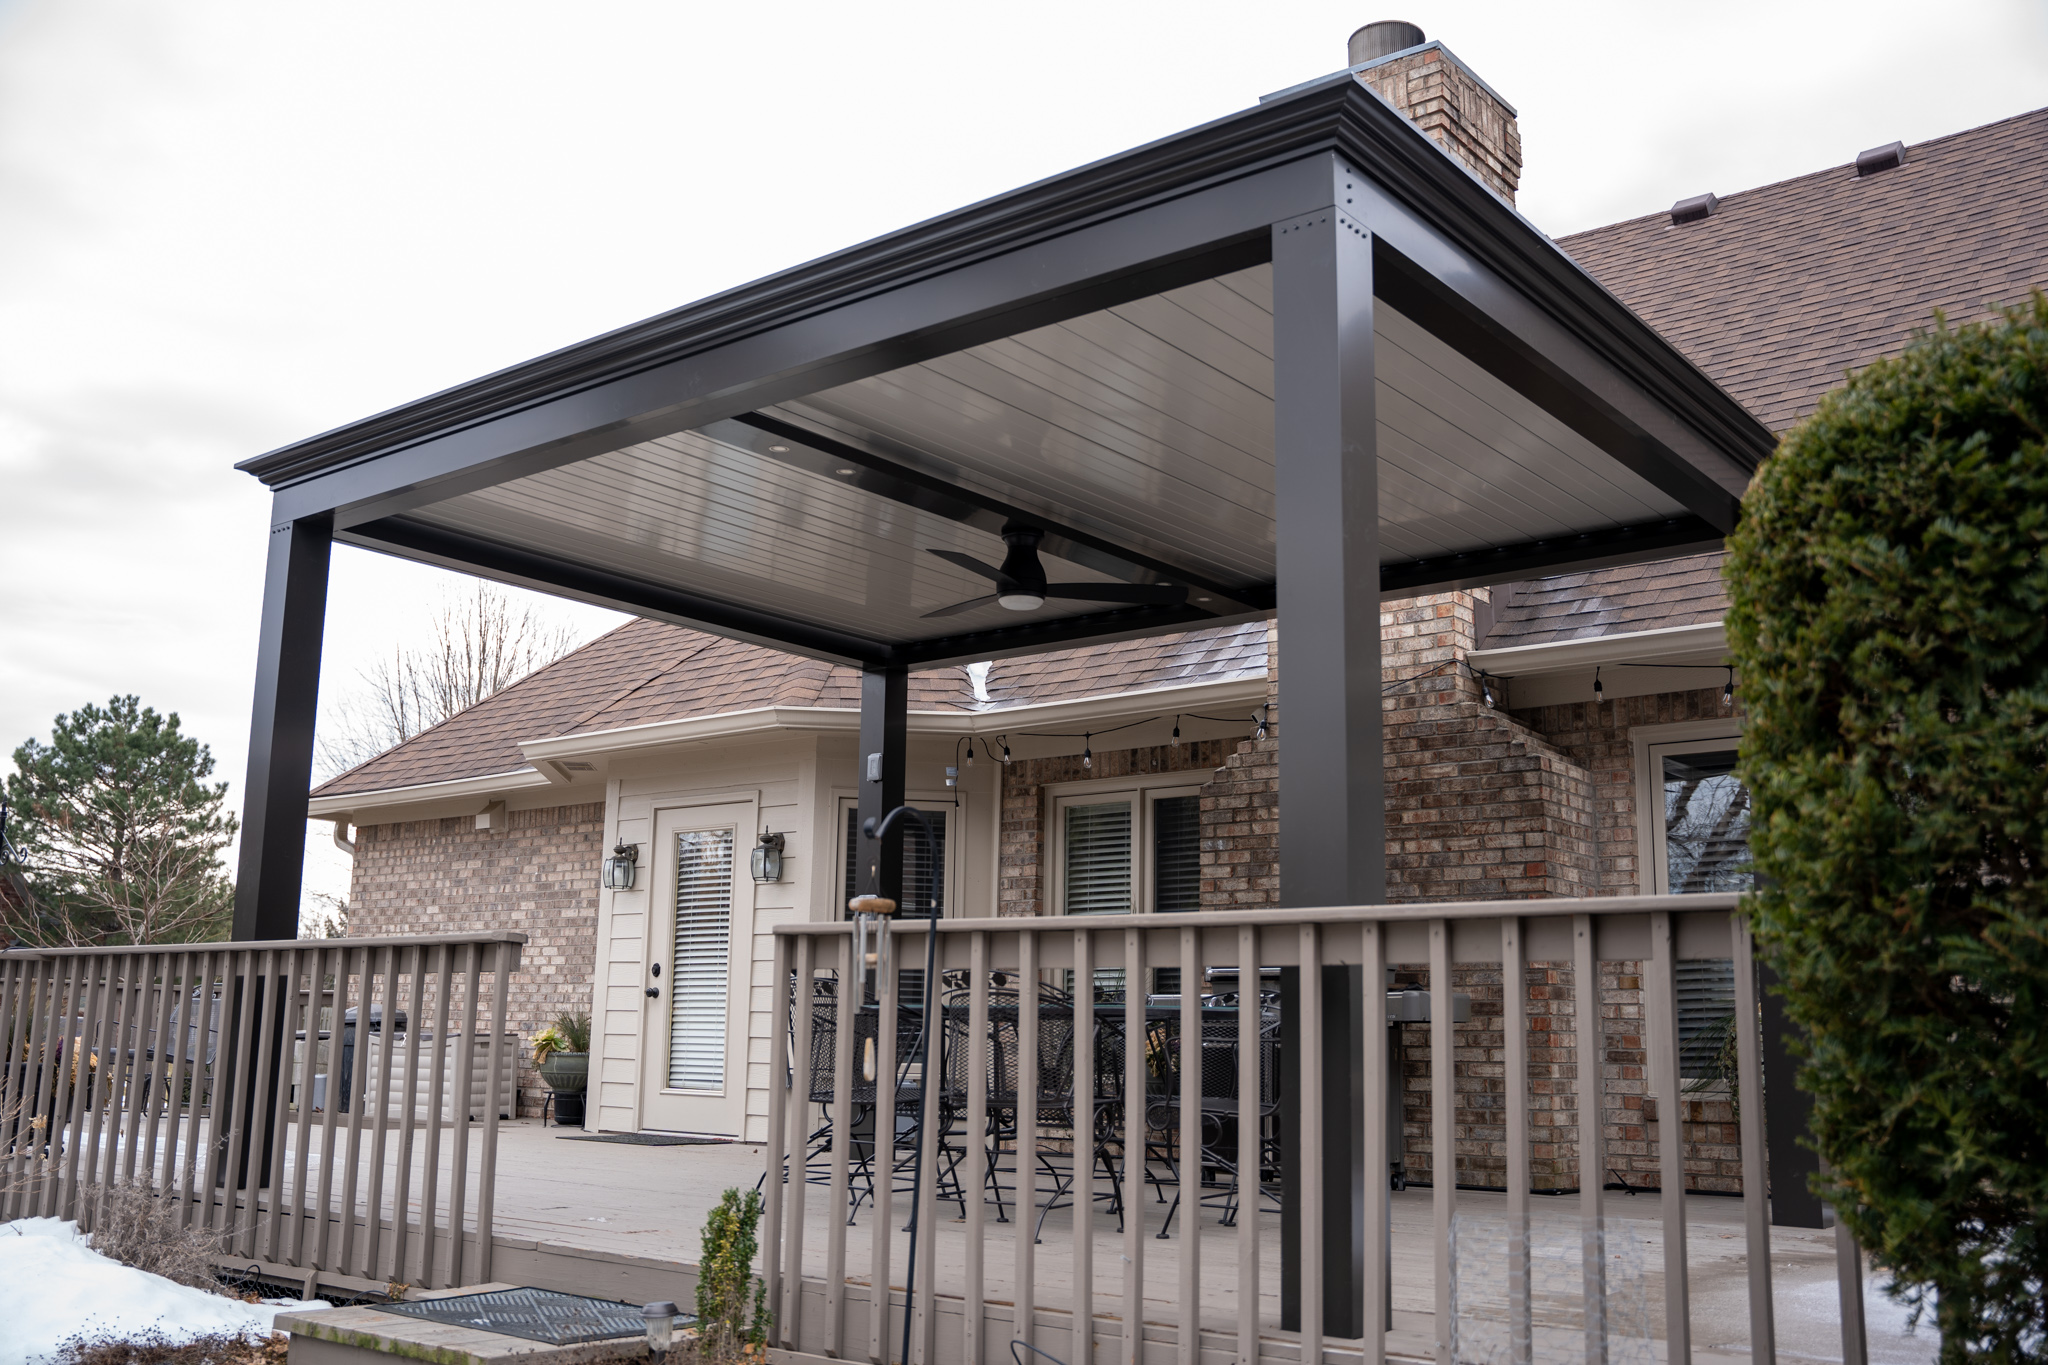 Aluminum canopies with louvered roof system.  Sun and shade protection over your patio.  Lots of custom styles that protects your outdoor space.